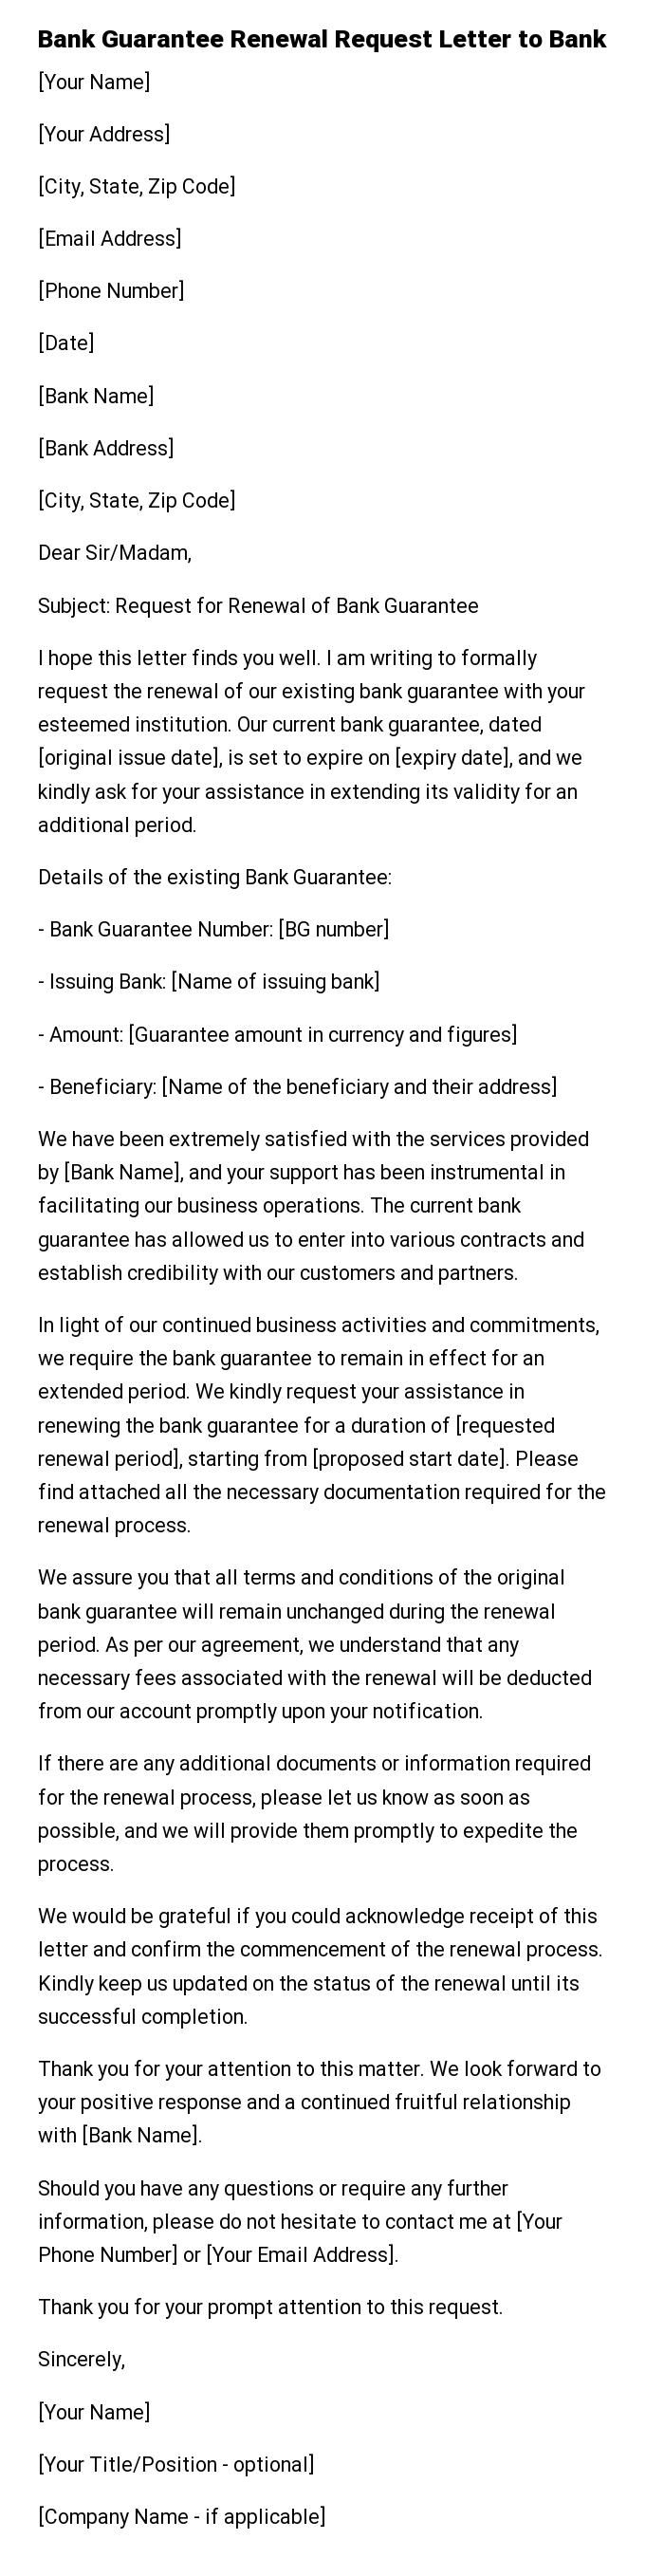 Bank Guarantee Renewal Request Letter to Bank